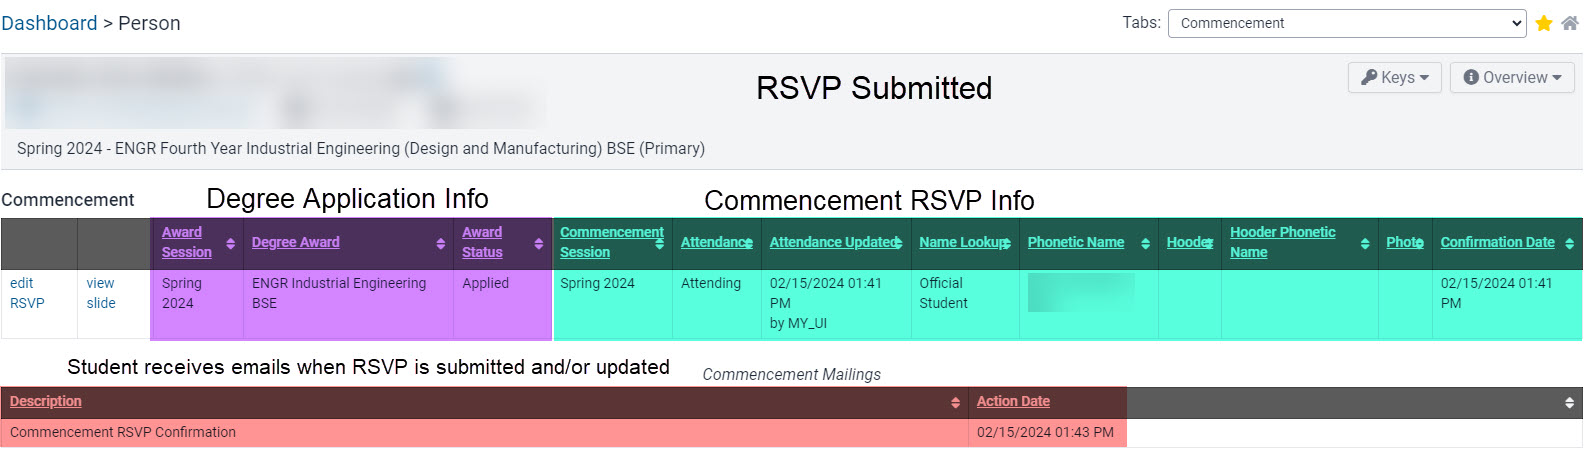 Commencement panel showing degree application, RSVP confirmation info and commencement mailing timestamp.